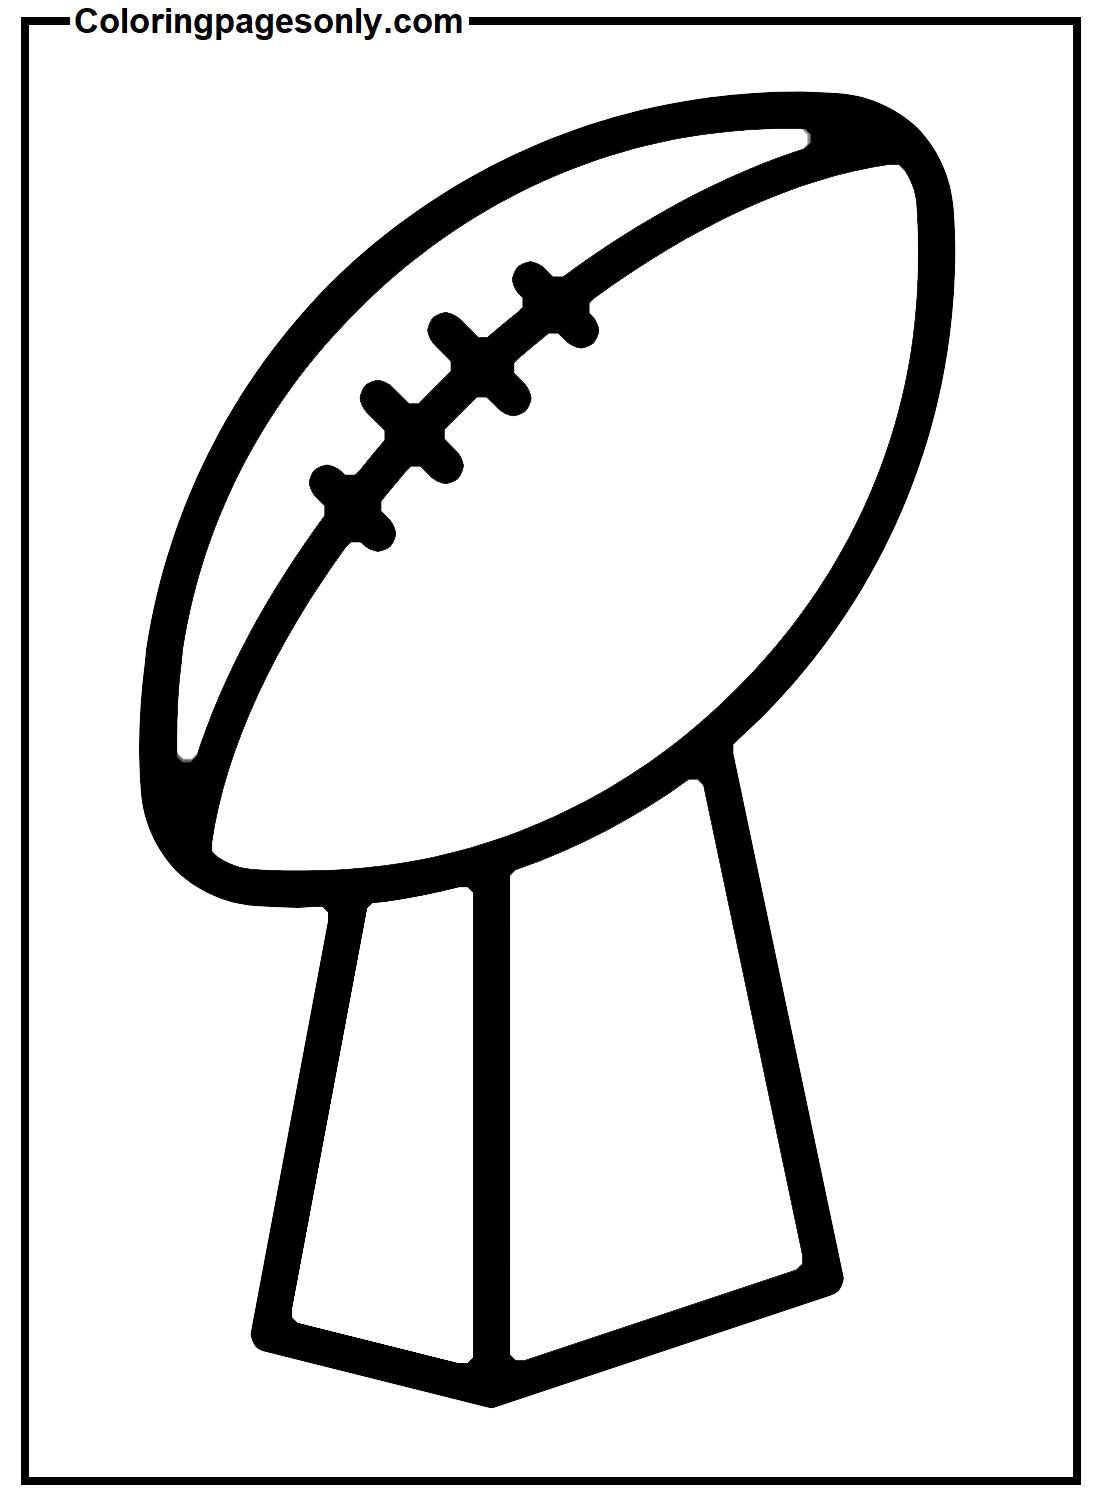 Super Bowl Cup Coloring Page